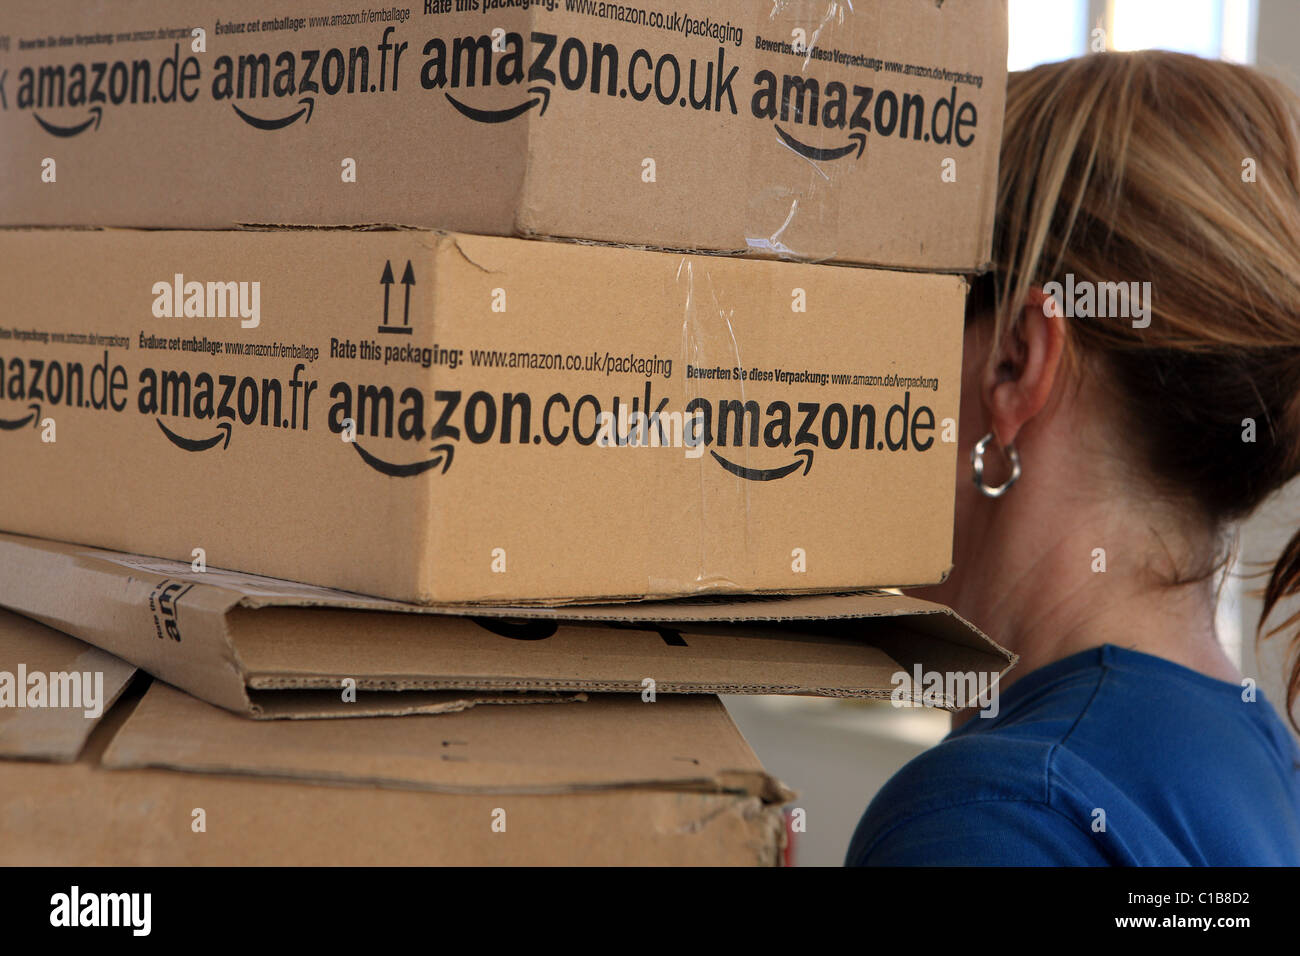 Woman carrying a stack of Amazon boxes Stock Photo